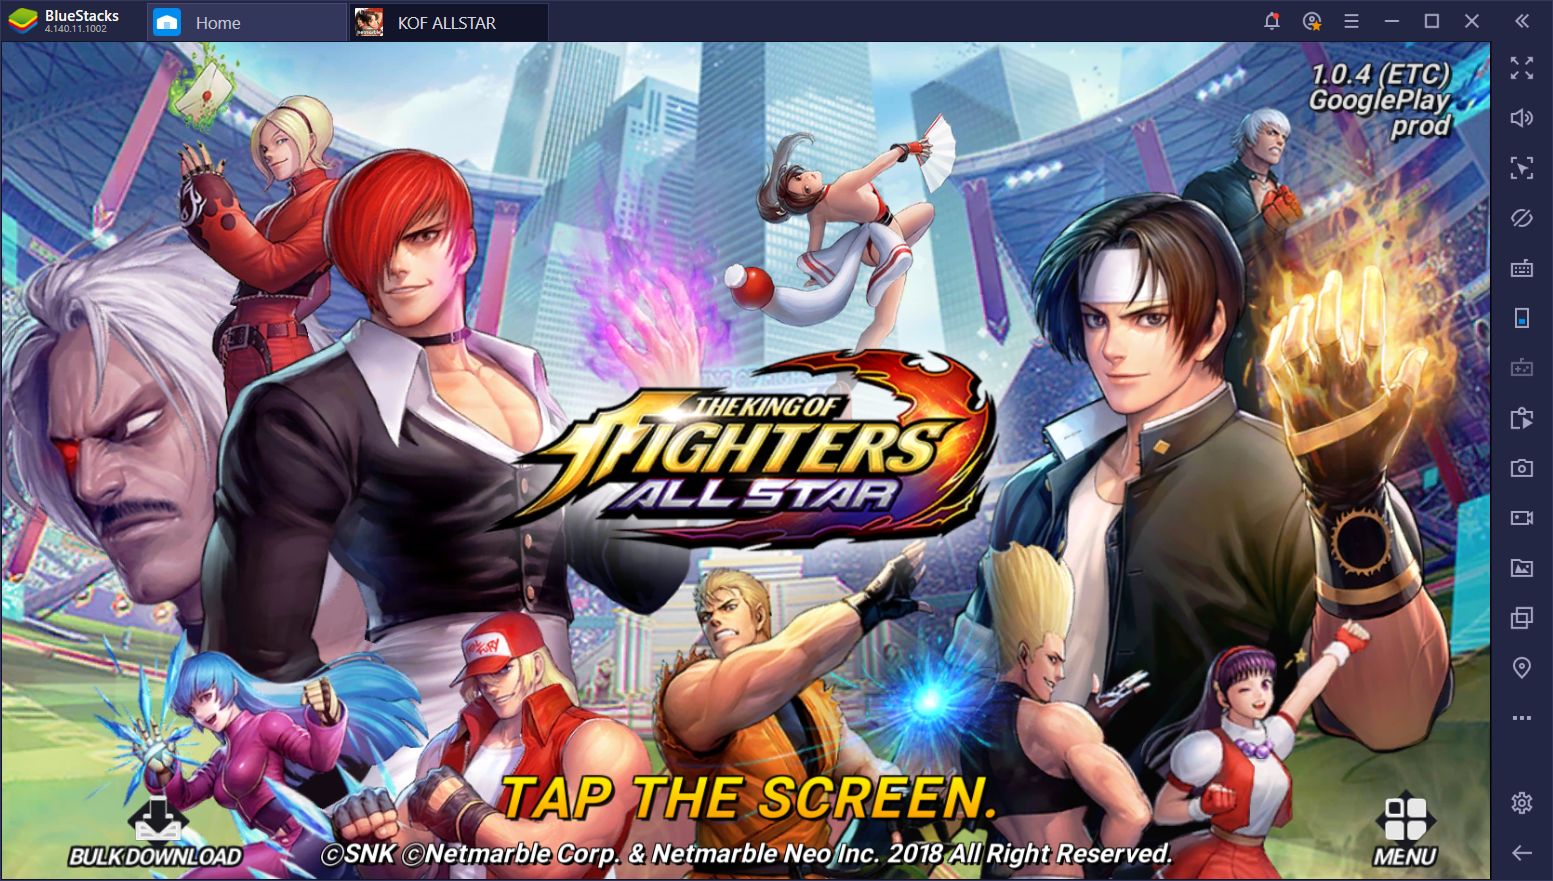 How to Play King of Fighters All Stars on Your PC Using BlueStacks